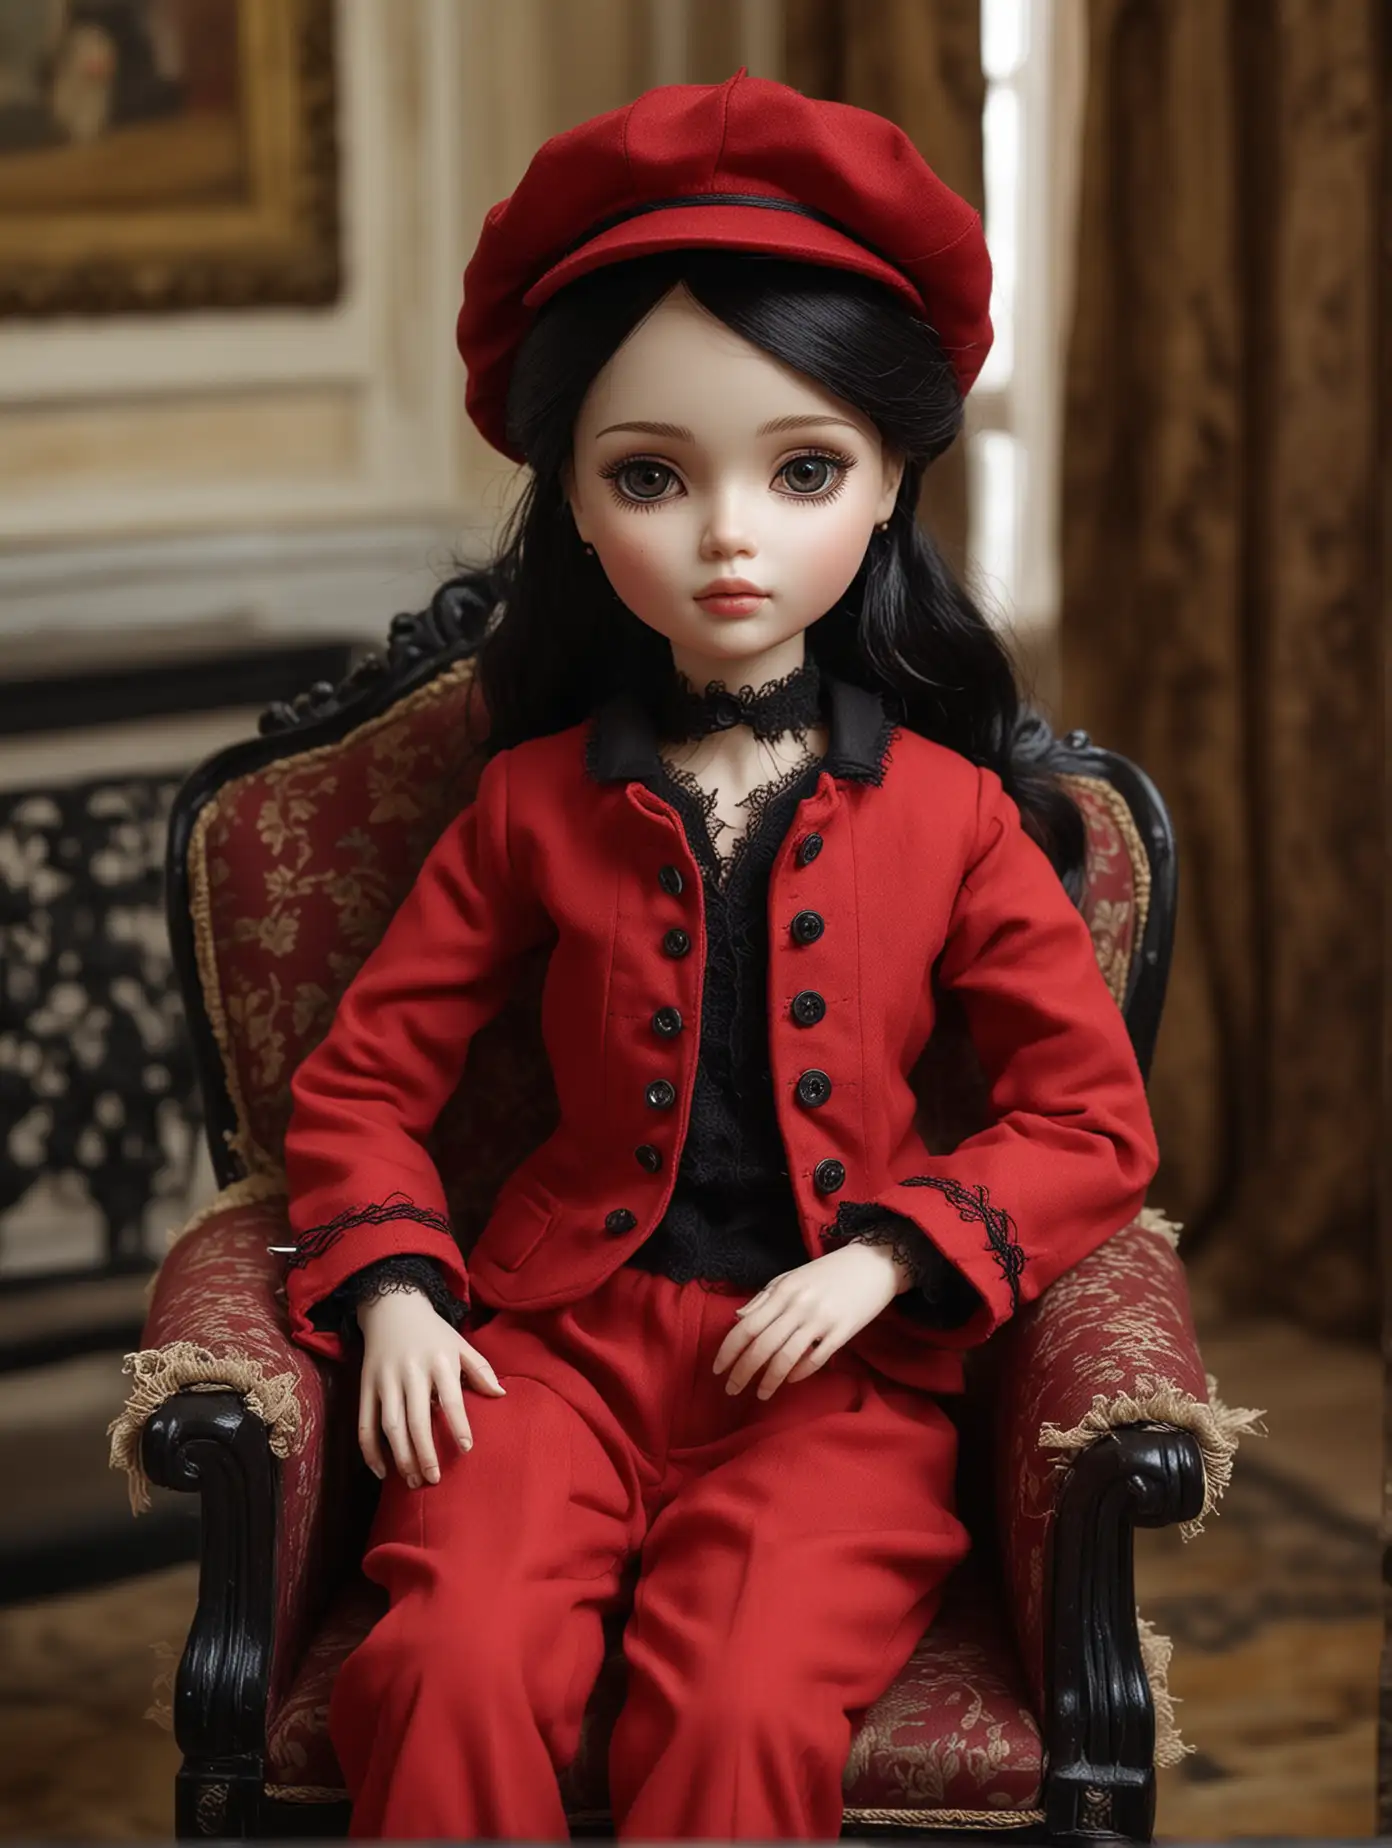 Beautiful female doll, white skin, shoulder length black hair, red hat. fink jacket, red trousers, black shoes, relaxing on a palace chair